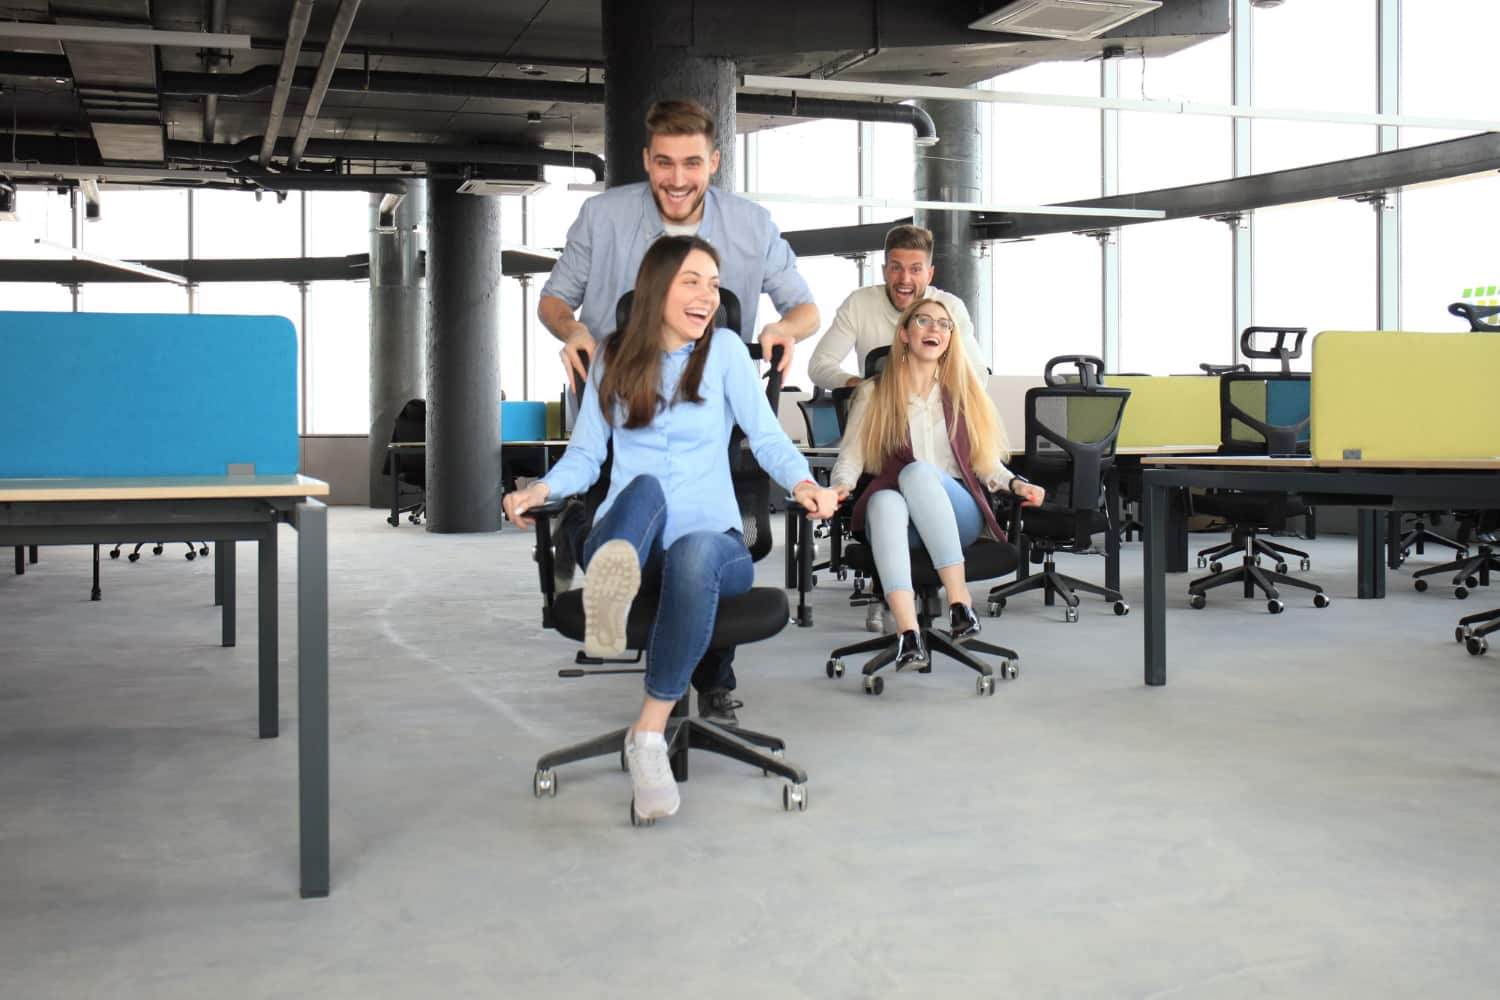 Happy employees pushing each other around in their office chairs.